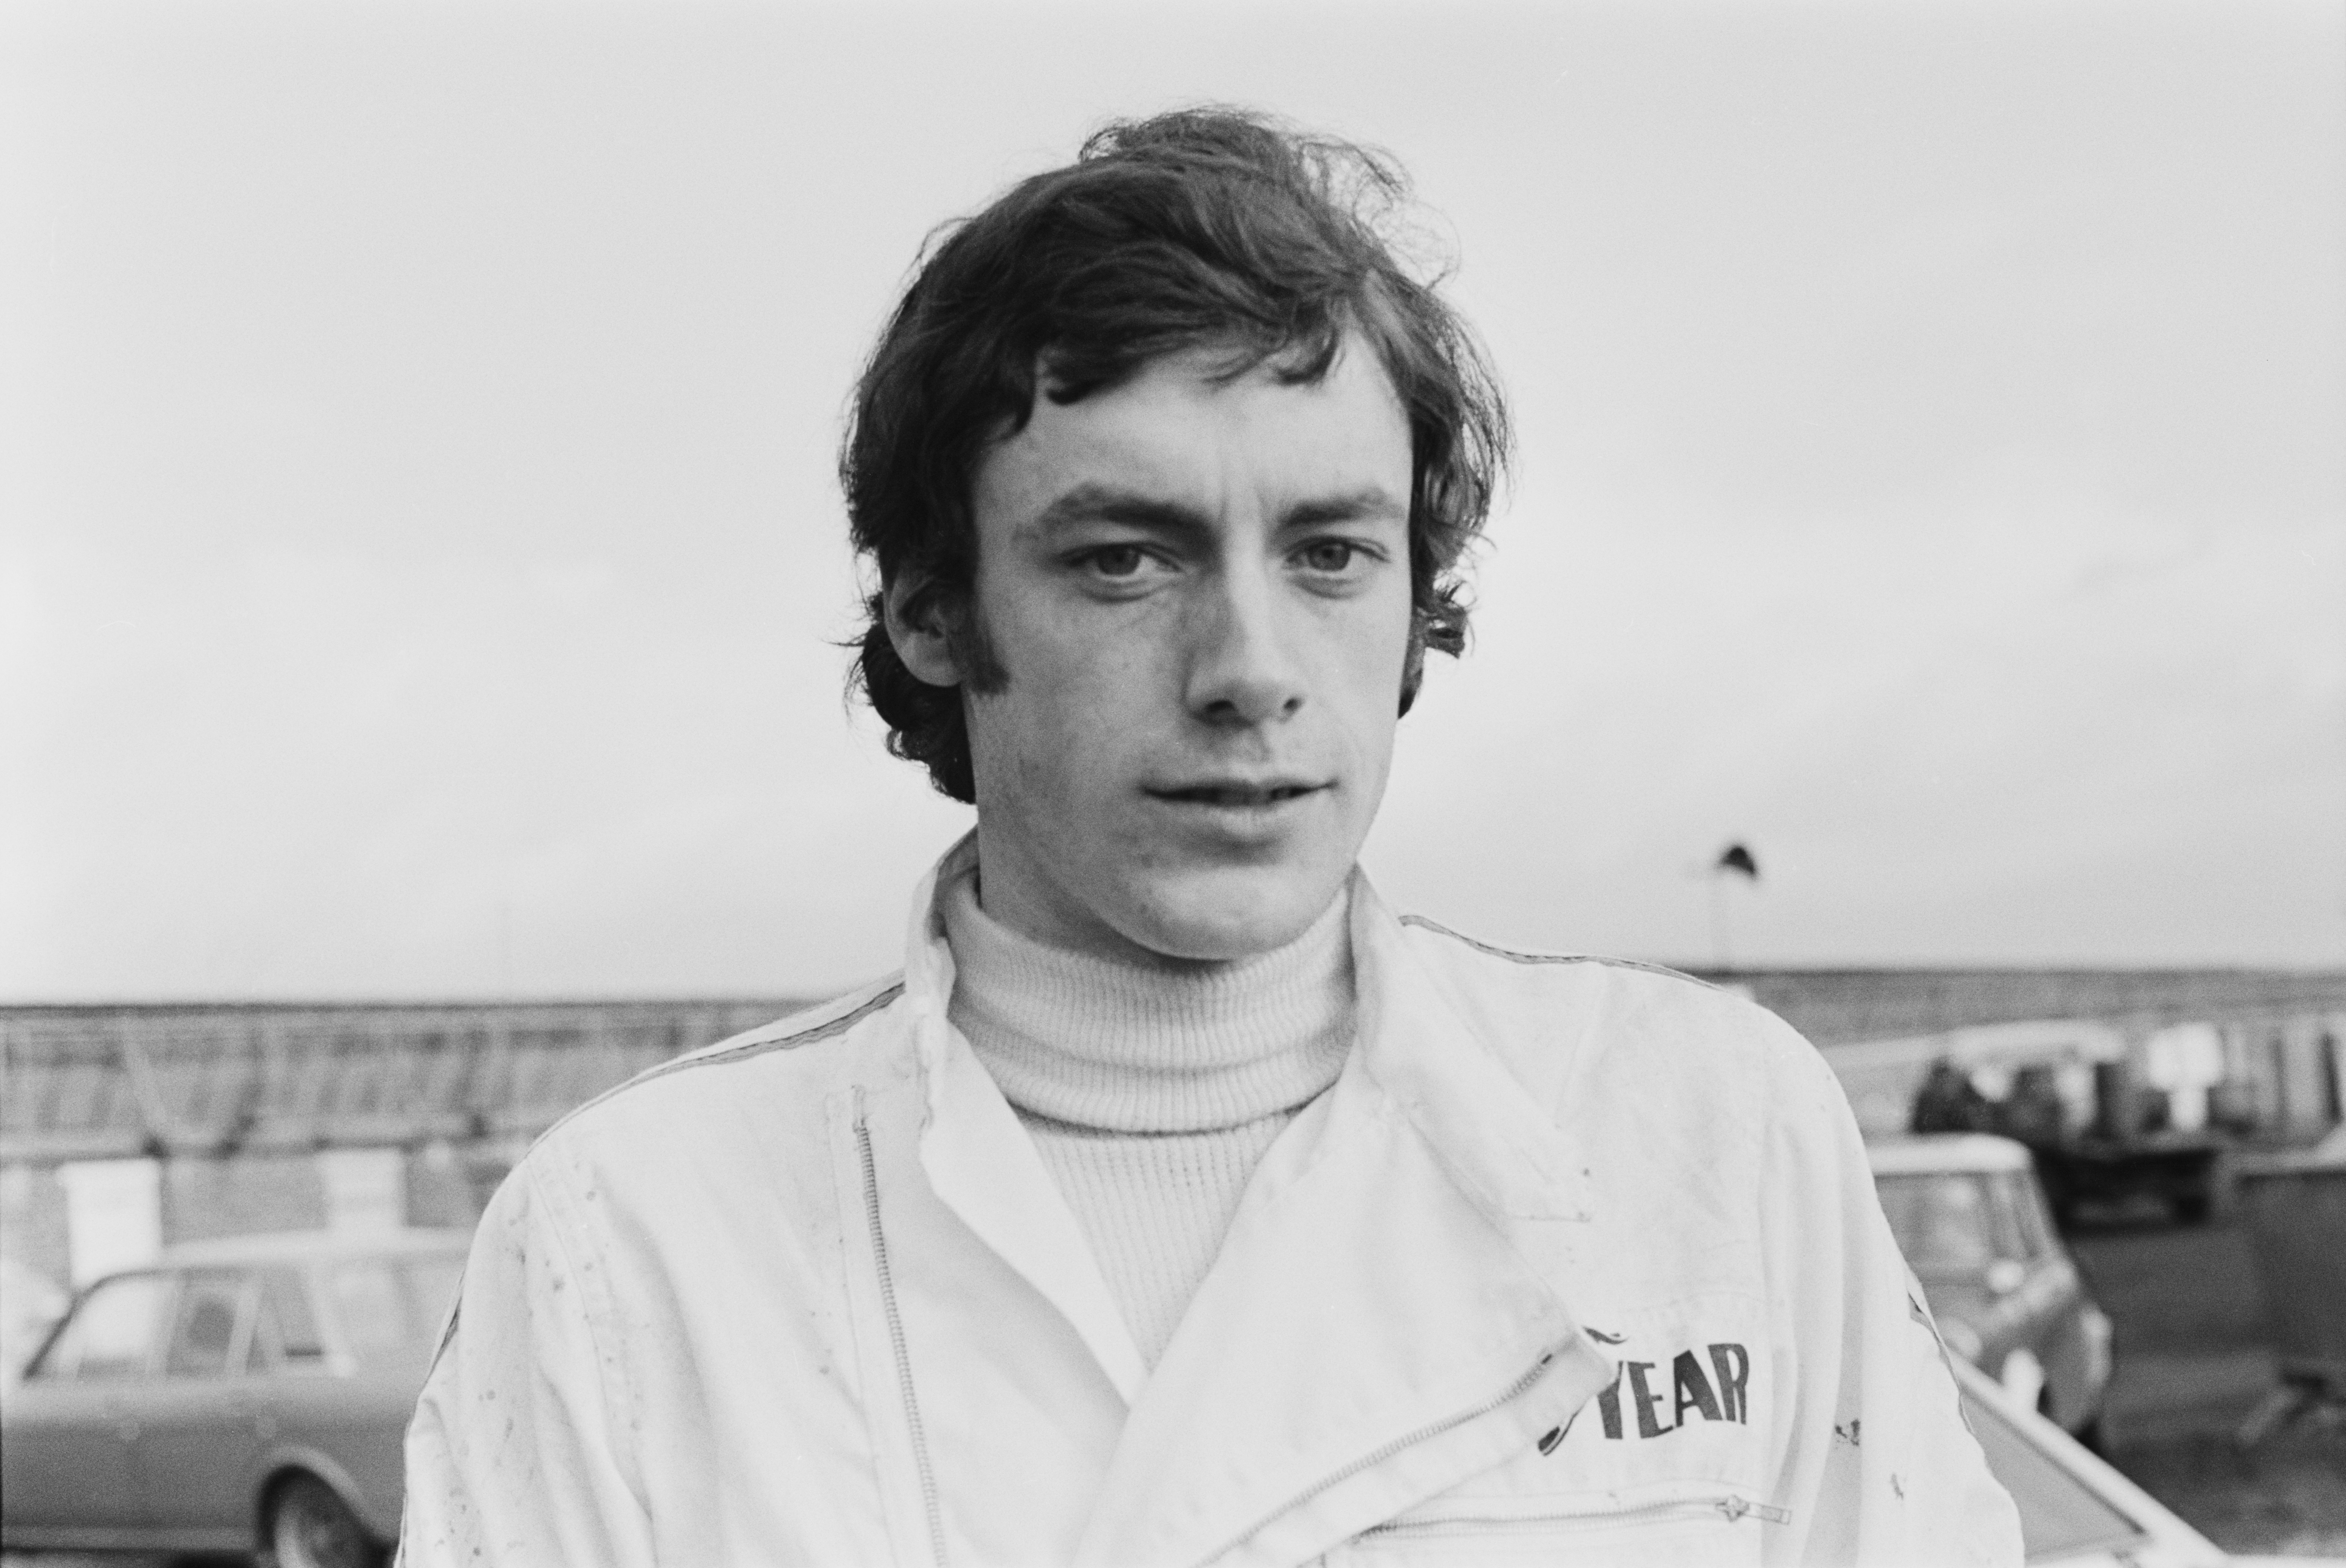 Grand Prix Driver Tom Pryce Died After Hitting a Fire Marshall at 170 Mile Per Hour: ‘There Was No Joy After That’